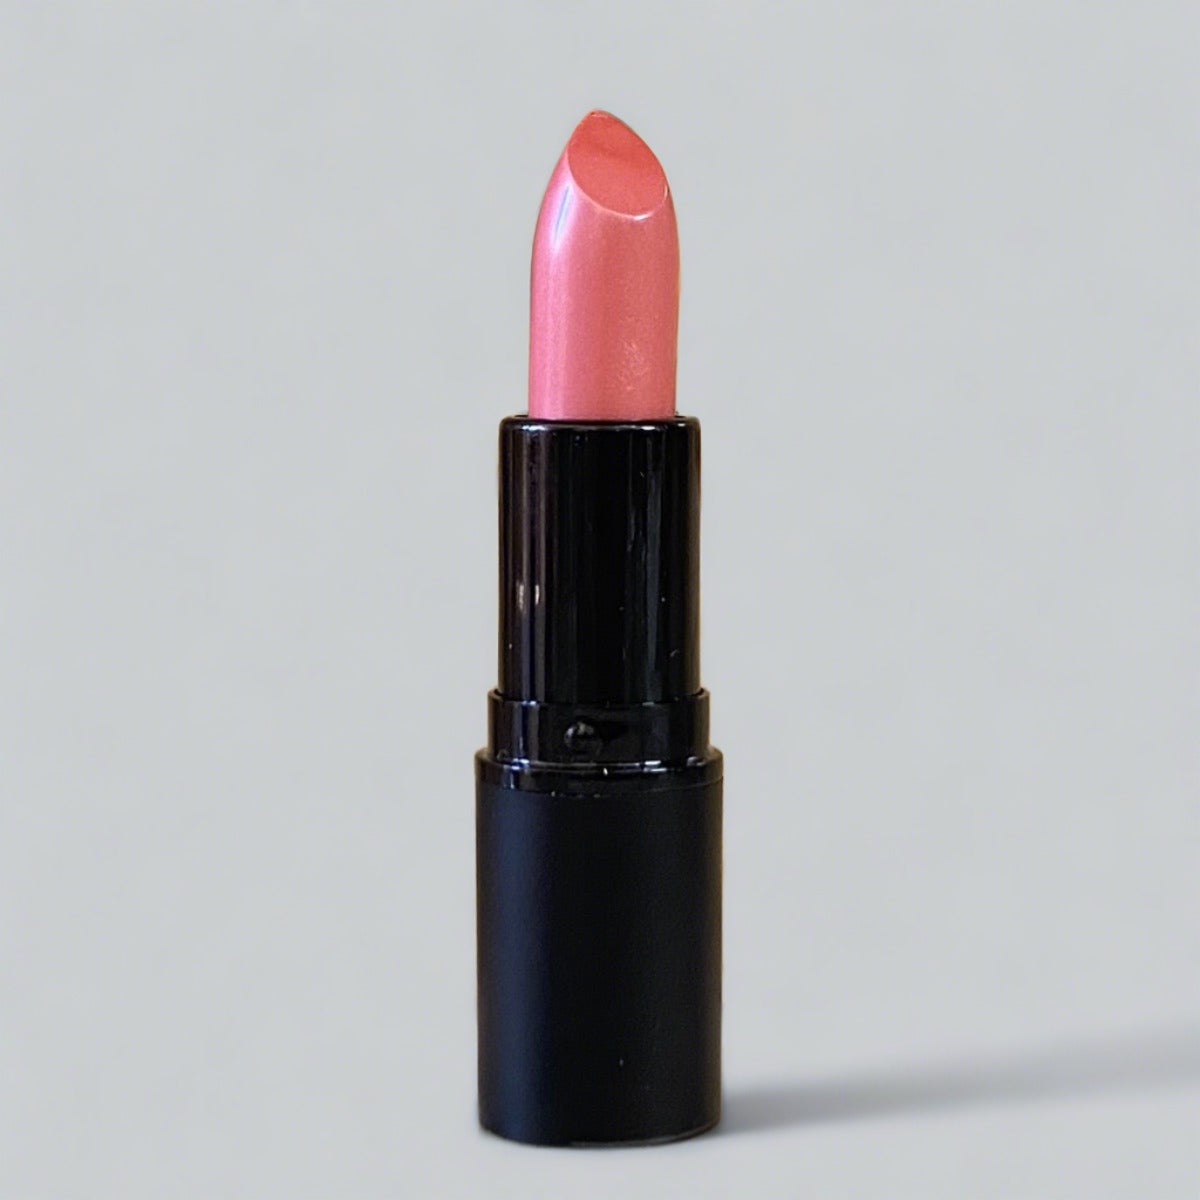 Bashful Lipstick - A charming pink coral shade, epitomizing comfort and style for a chic and effortless look